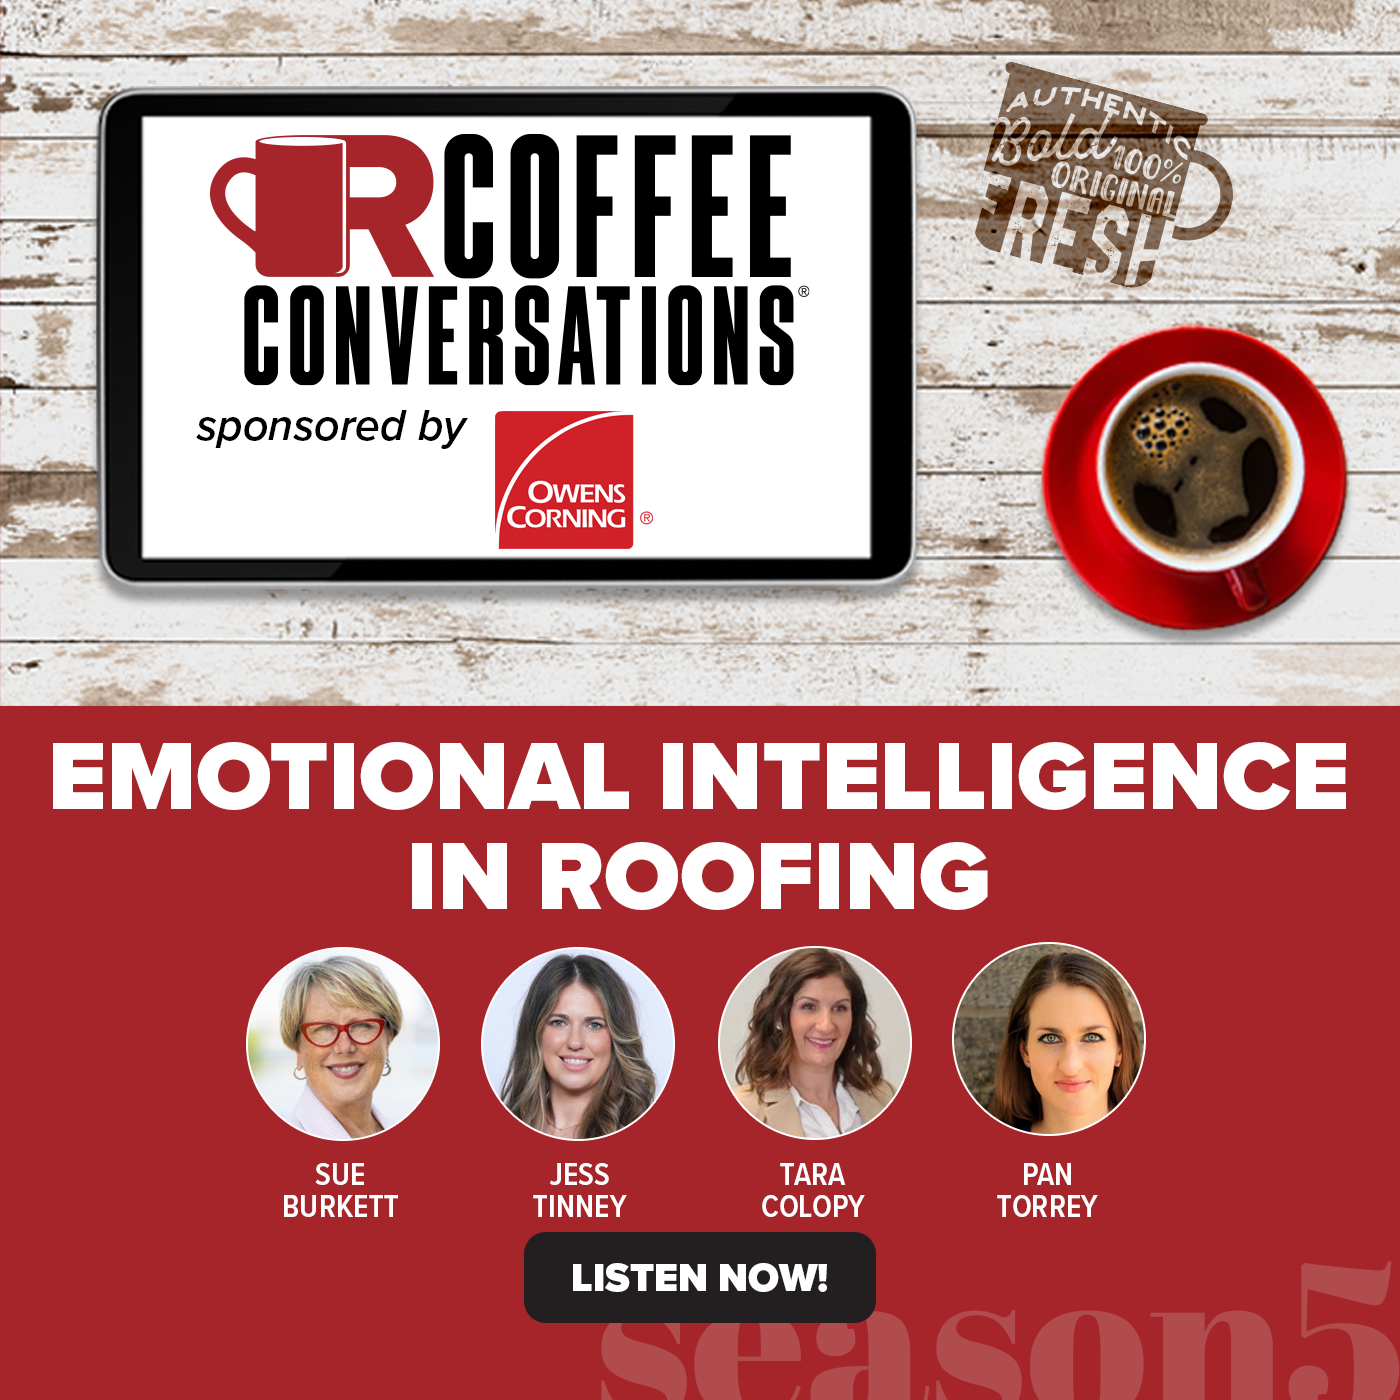 Owens Corning  - Emotional Intelligence in Roofing (Coffee Conversations Podcast)